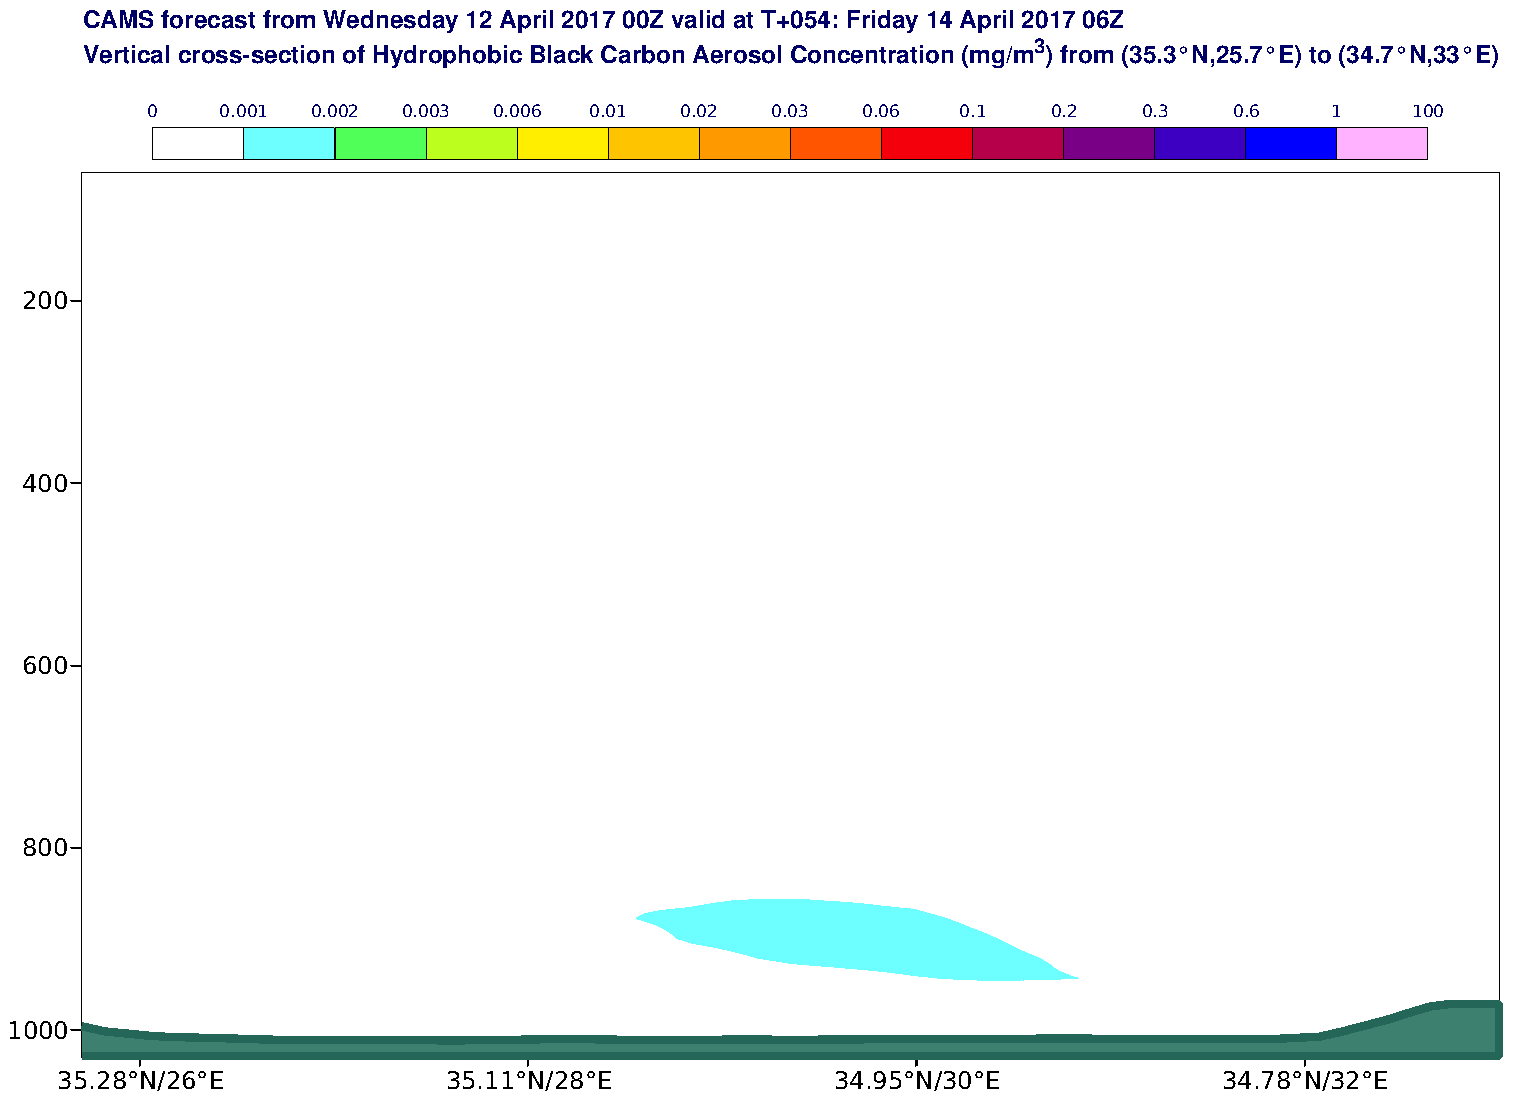 Vertical cross-section of Hydrophobic Black Carbon Aerosol Concentration (mg/m3) valid at T54 - 2017-04-14 06:00